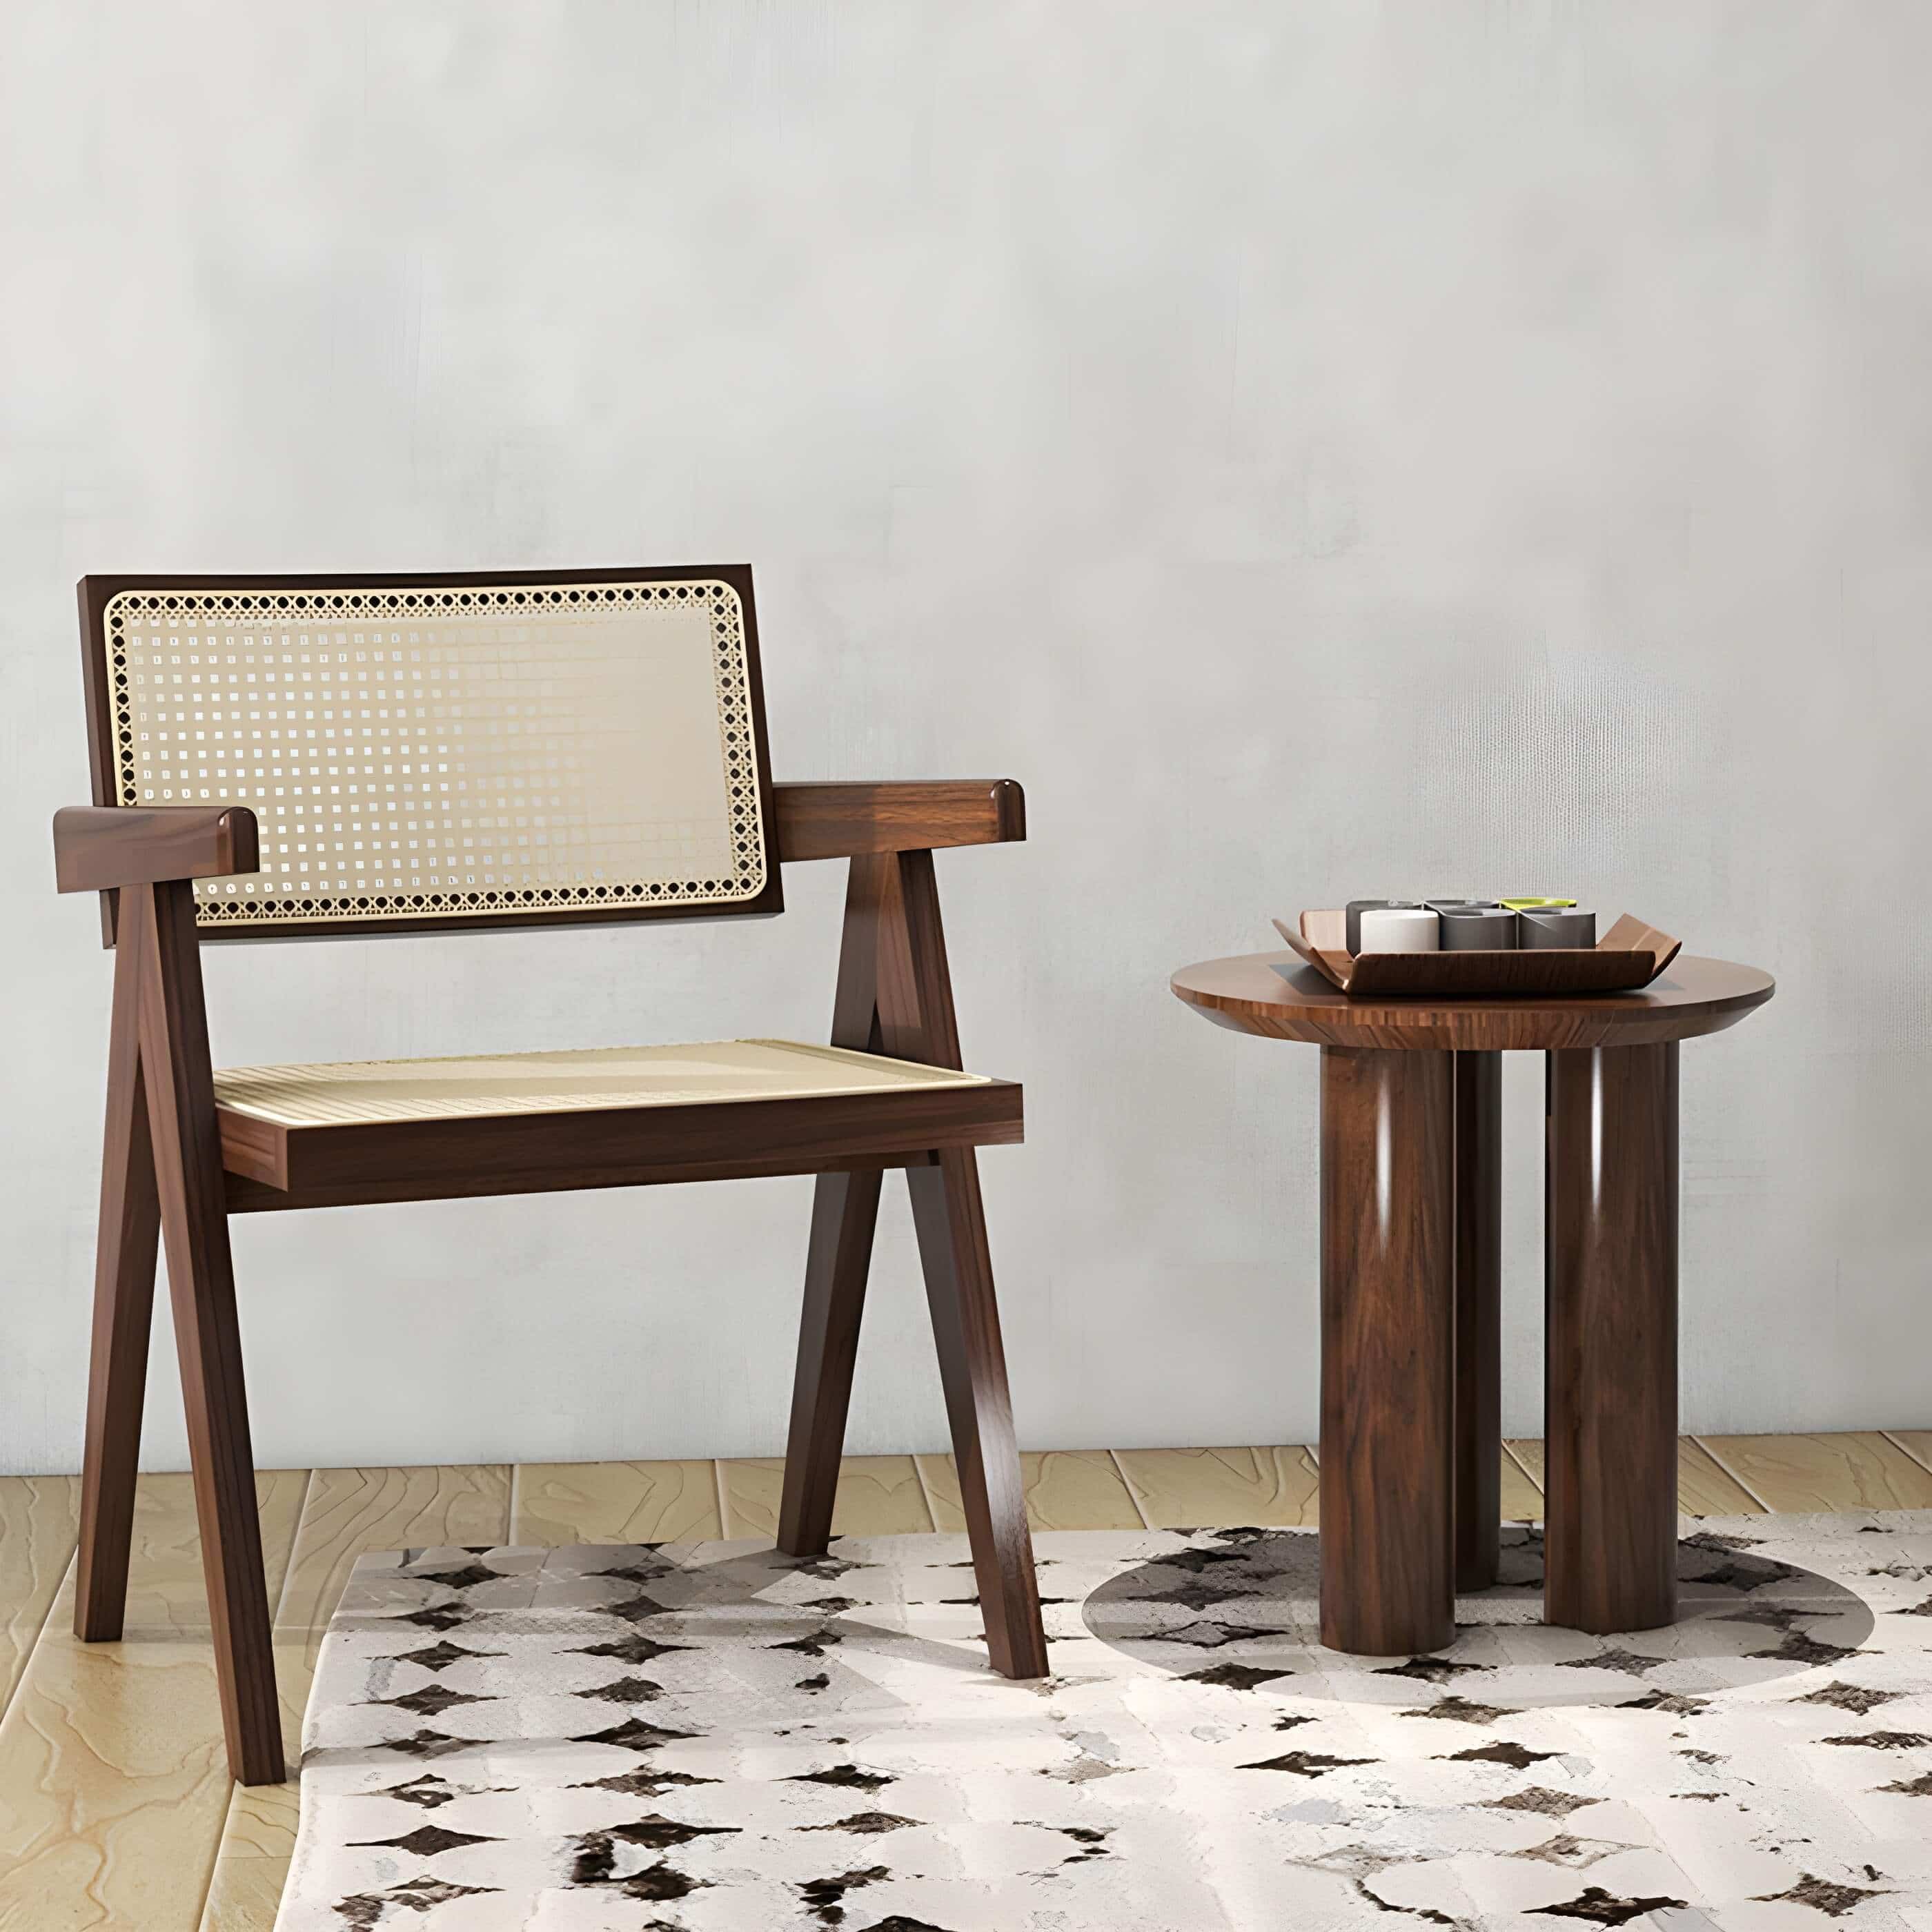 Idris circle wooden side table with 3 legs